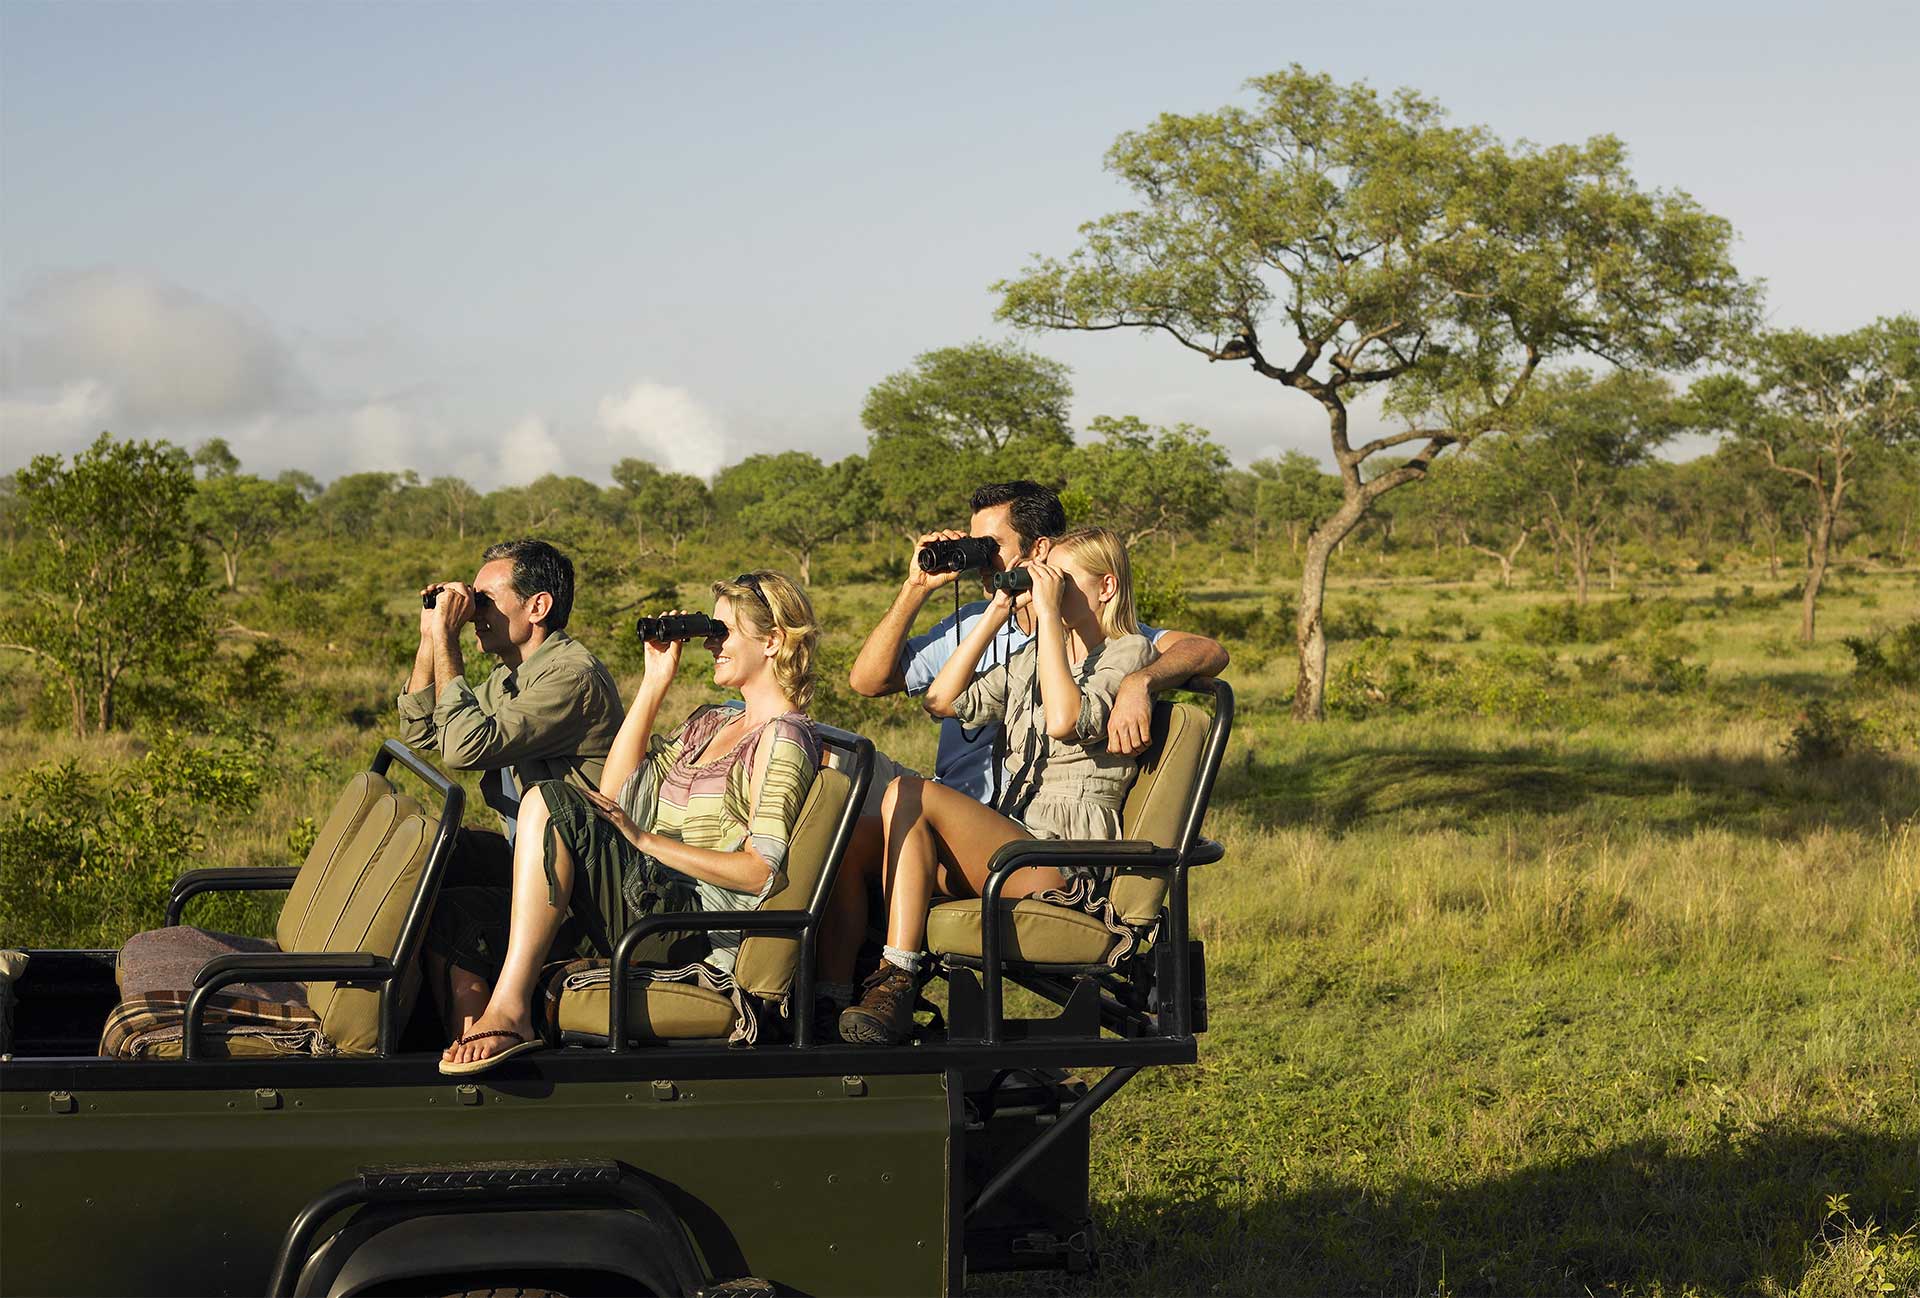 Tourists viewing game from an open safari vehicle